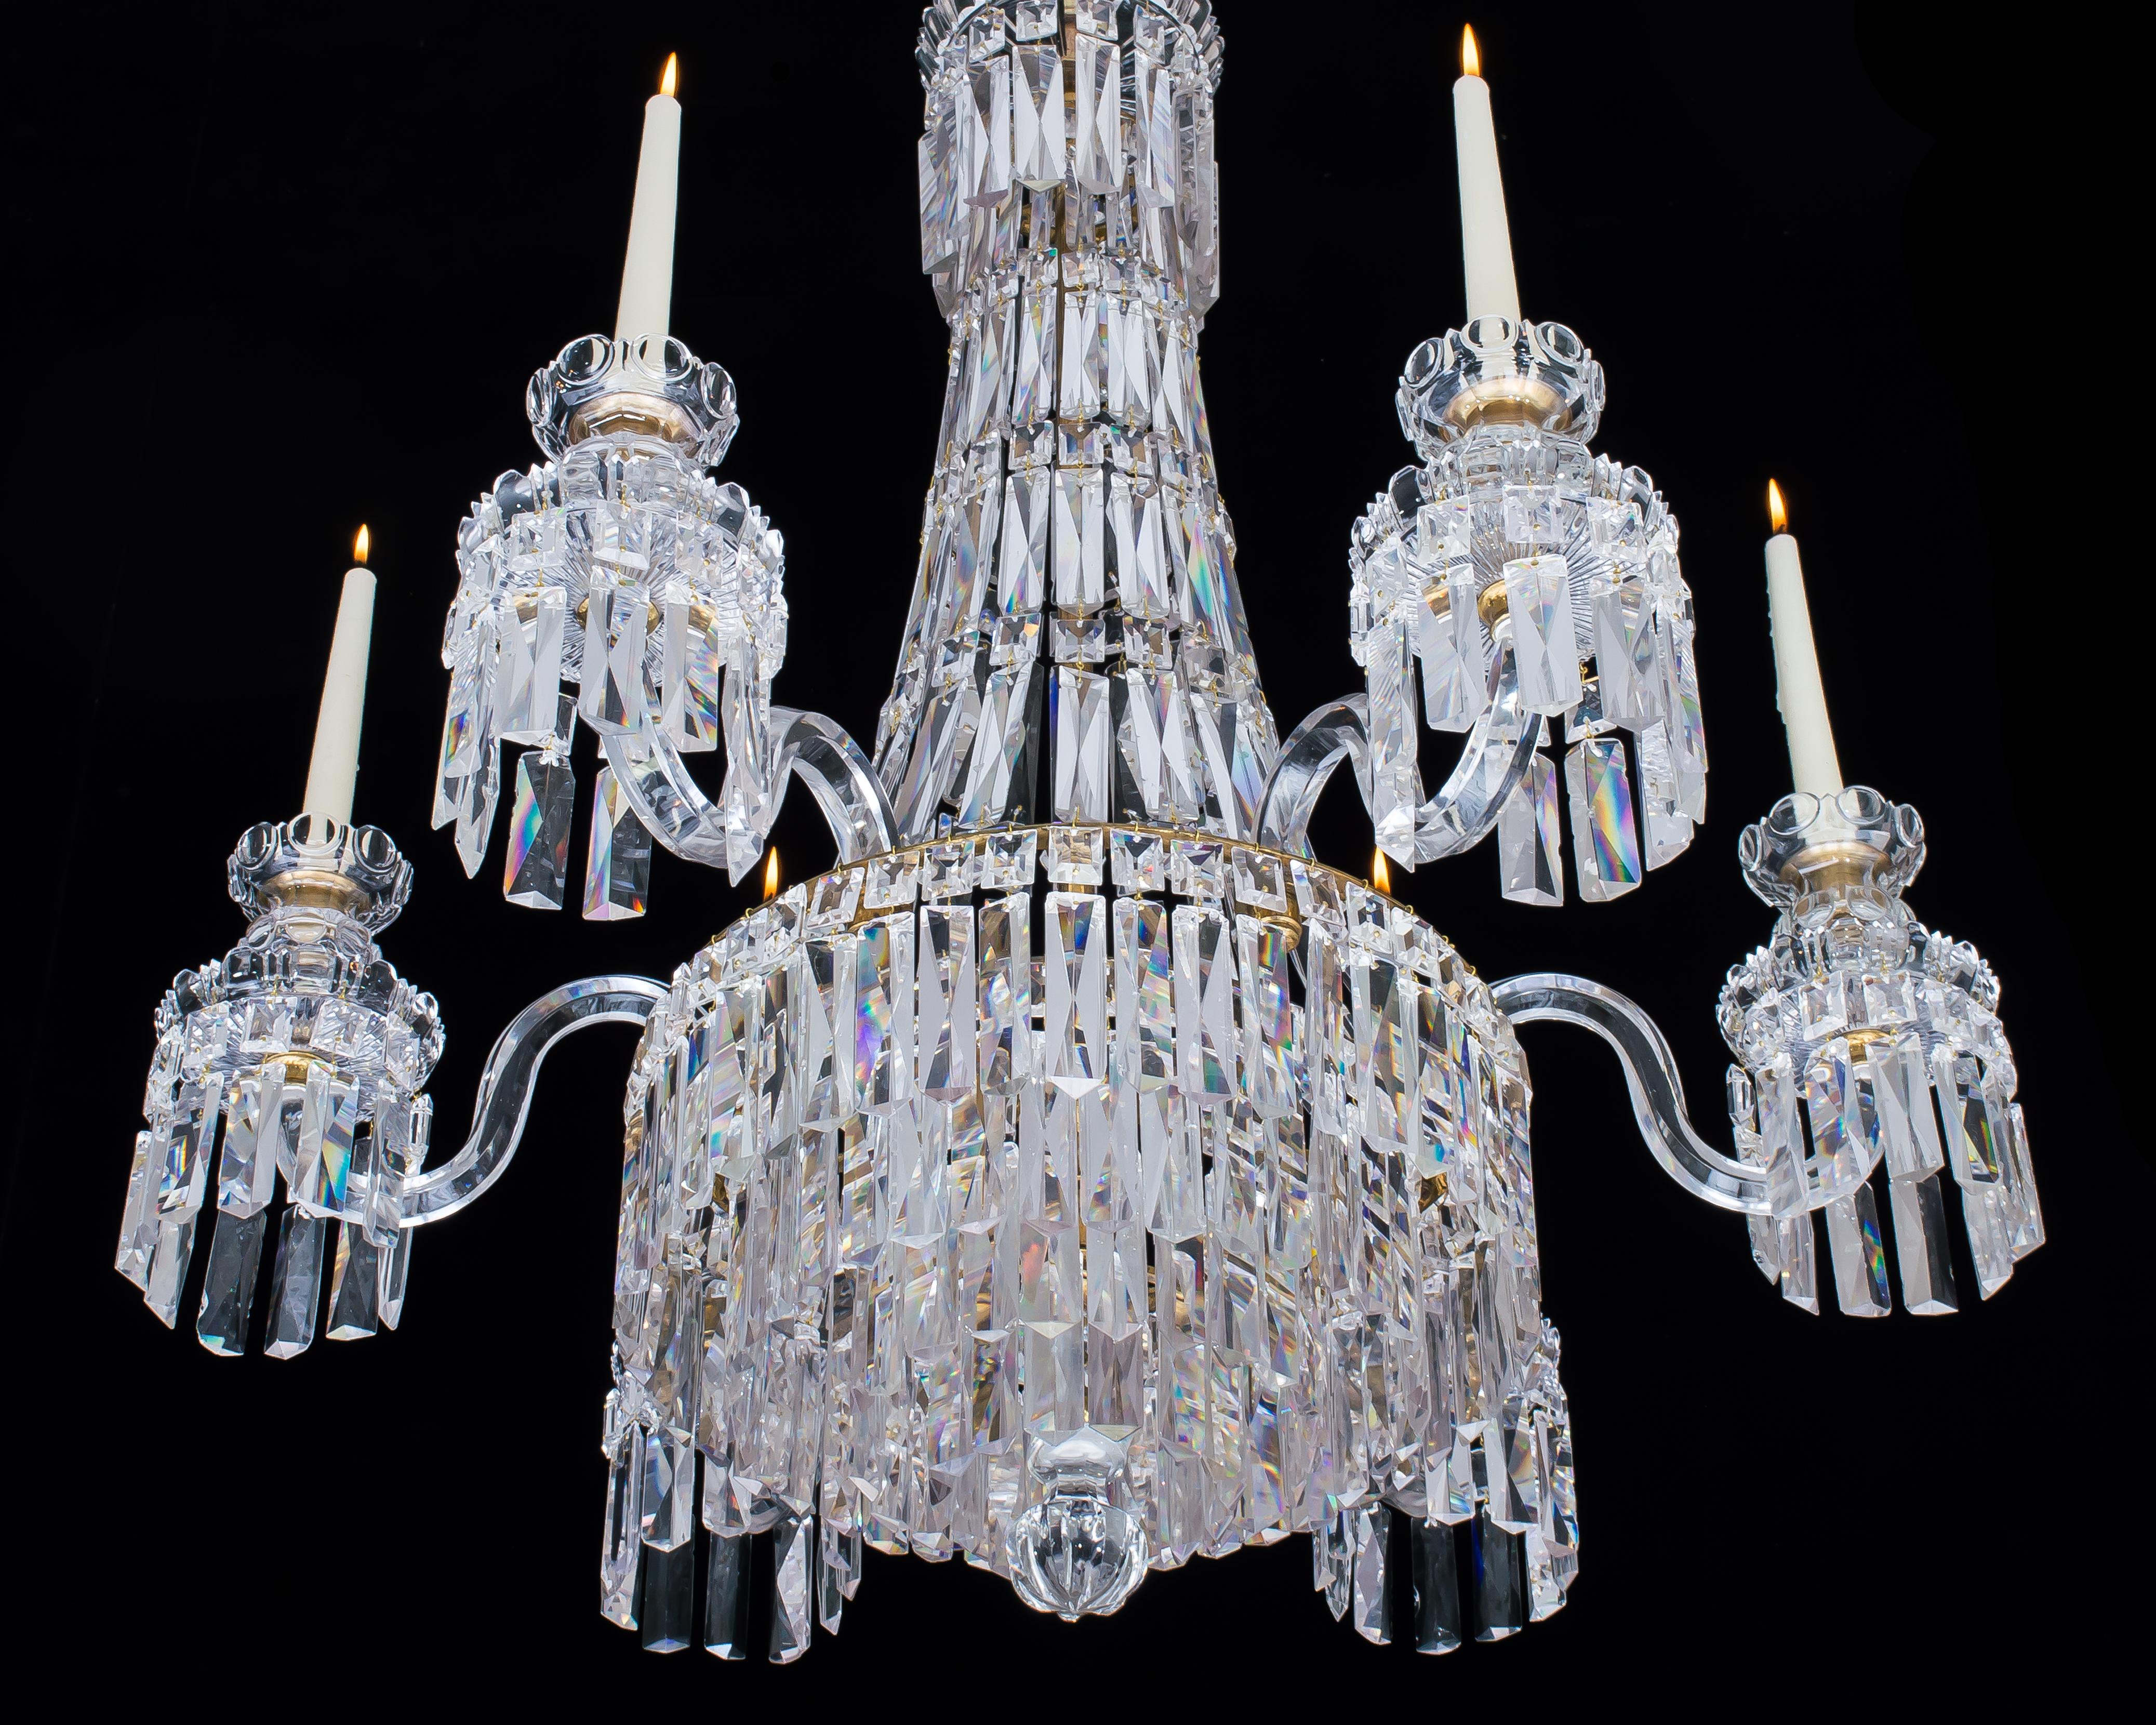 A William IV chandelier of Classic tent and waterfall design, from the drop hung corona the graduated chains Cascade to the main ring issuing six sided arms supporting radial cut drip pans and most unusual candle nozzles with convex and concave